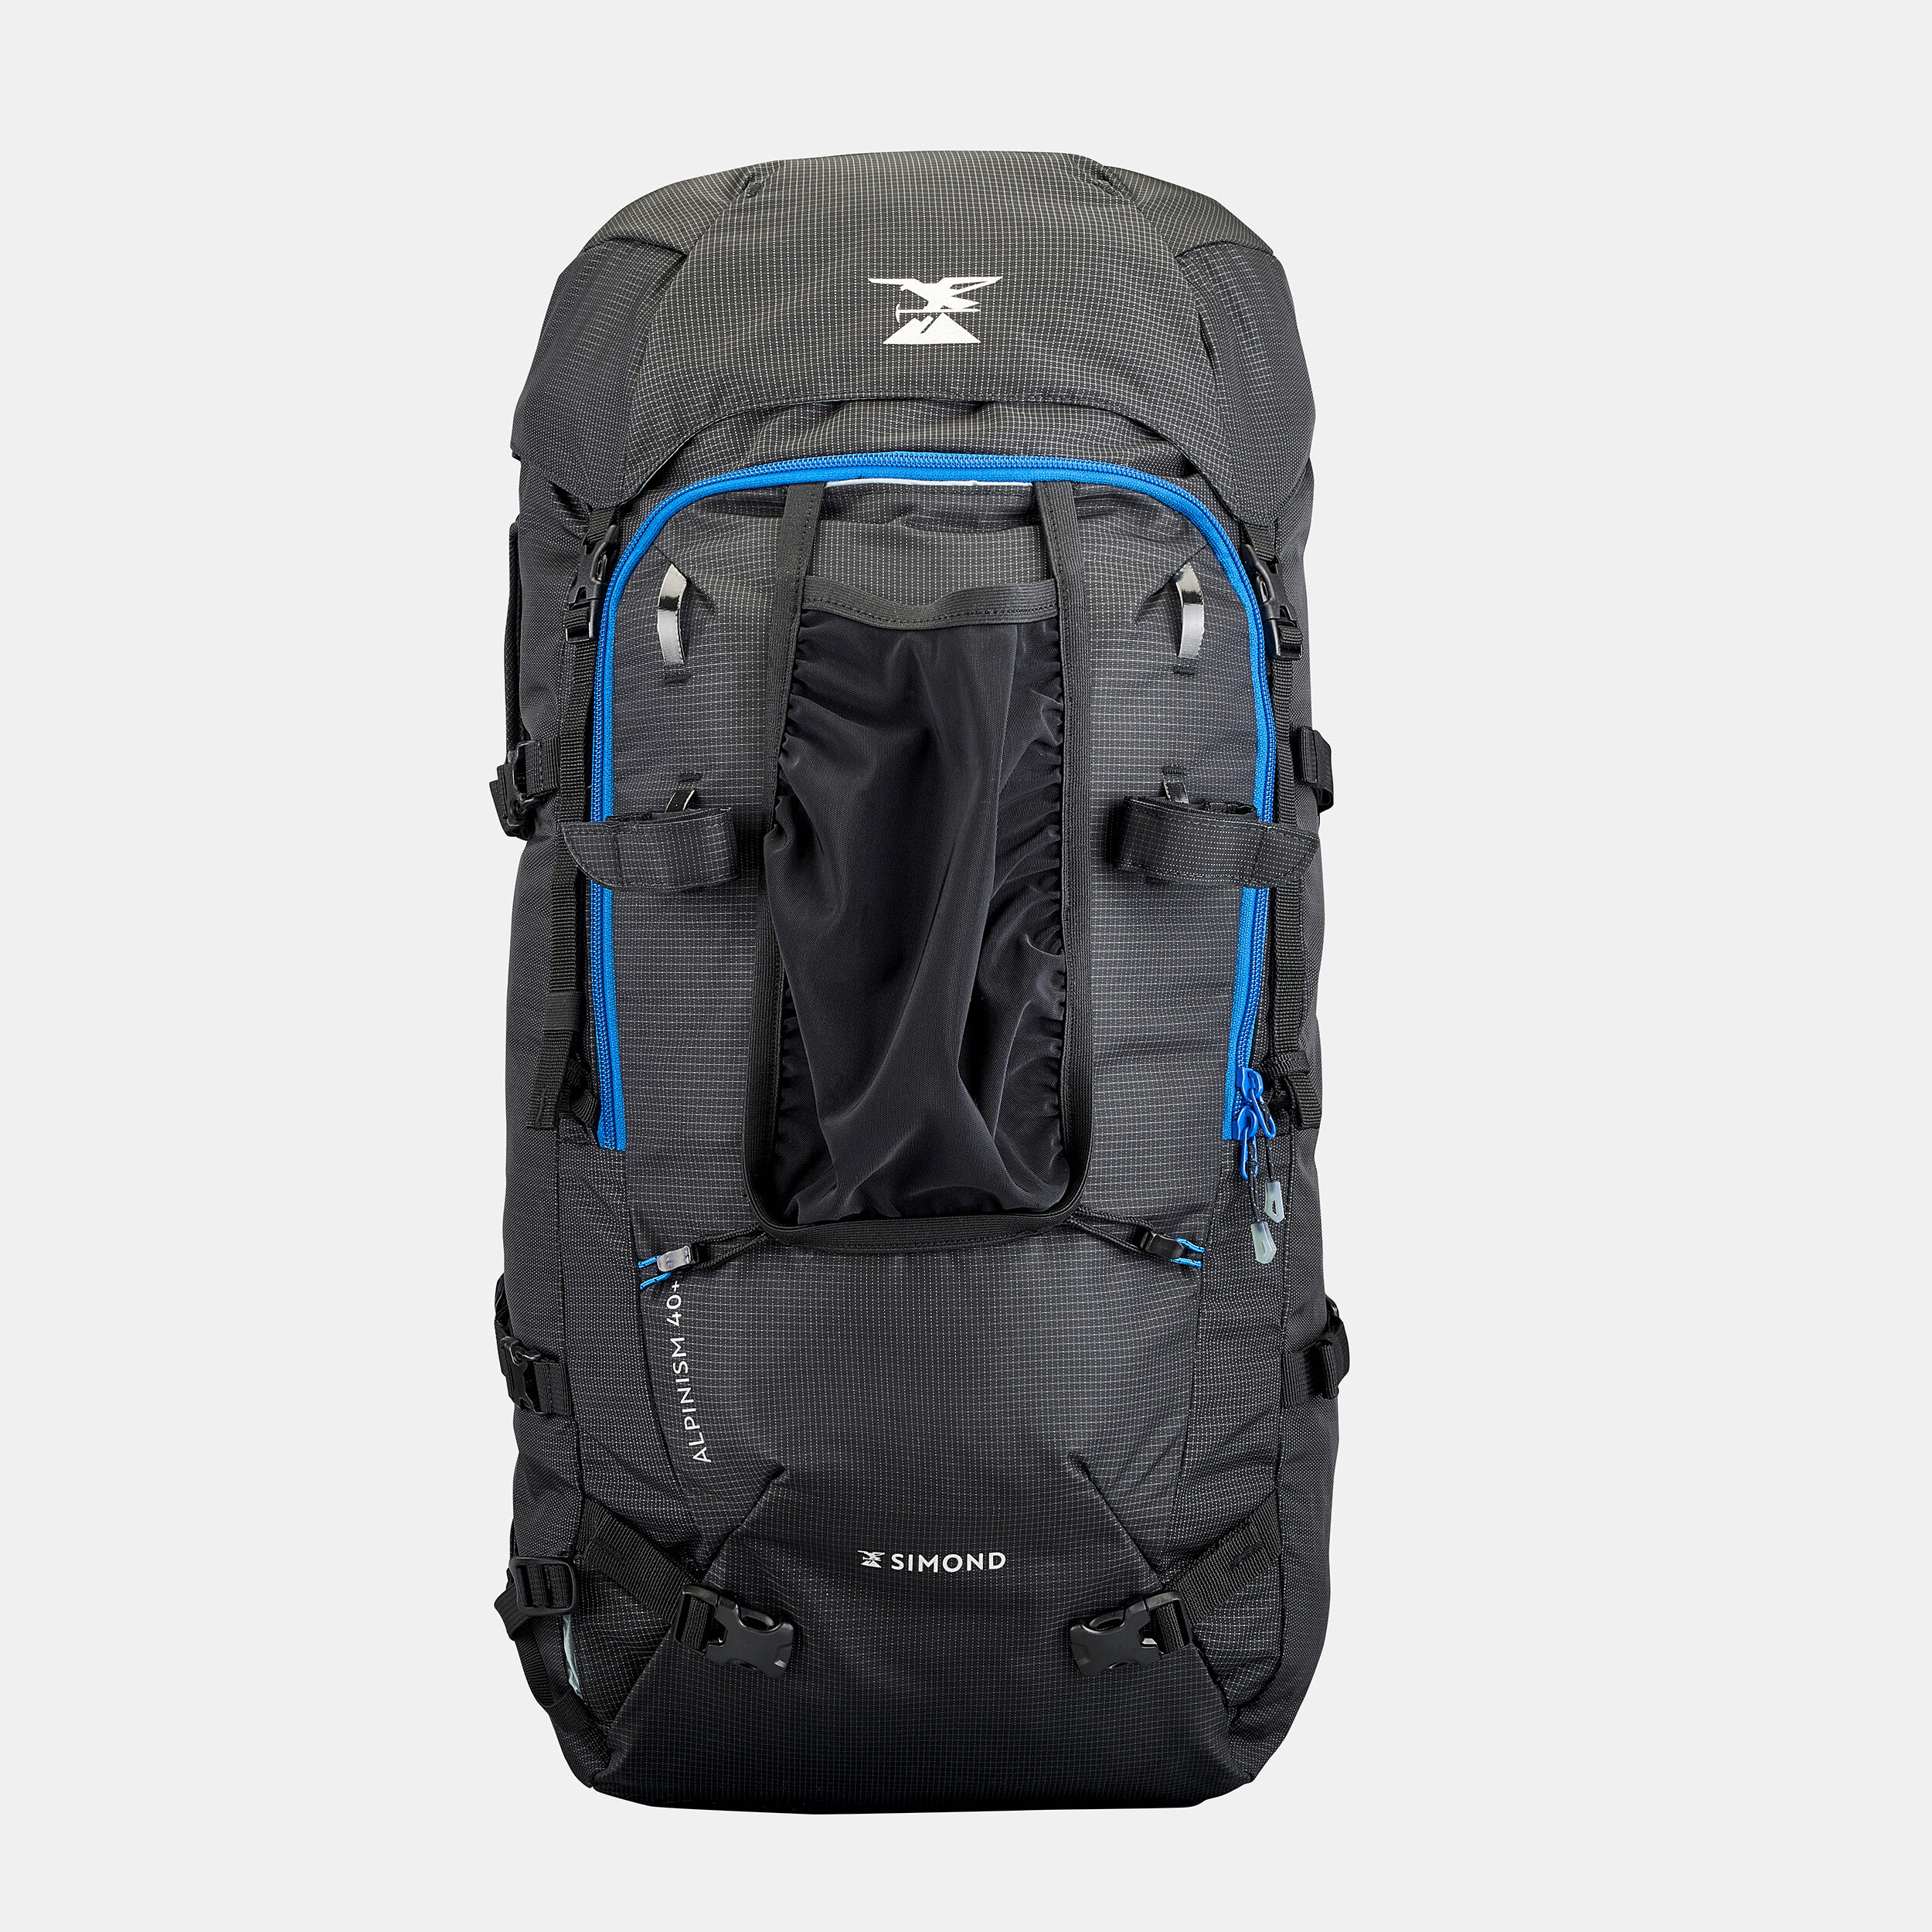 MOUNTAINEERING BACKPACK 40 LITRES - ALPINISM 40 EVO BLACK 4/15